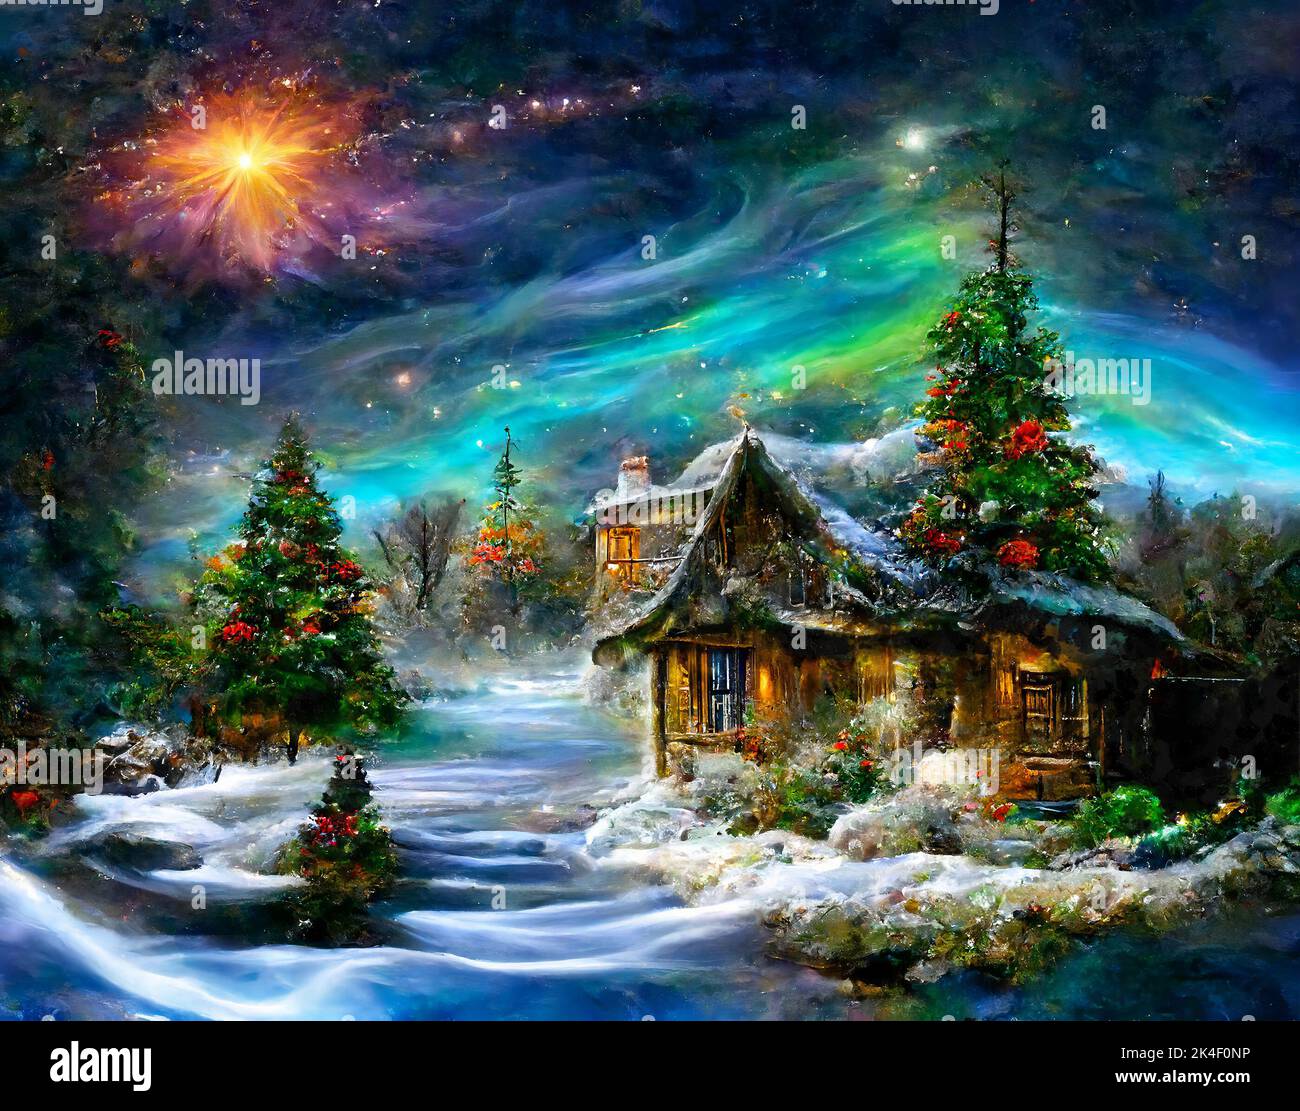 Fantasy cottage in winter snow landscape with northern lights on sky Stock Photo